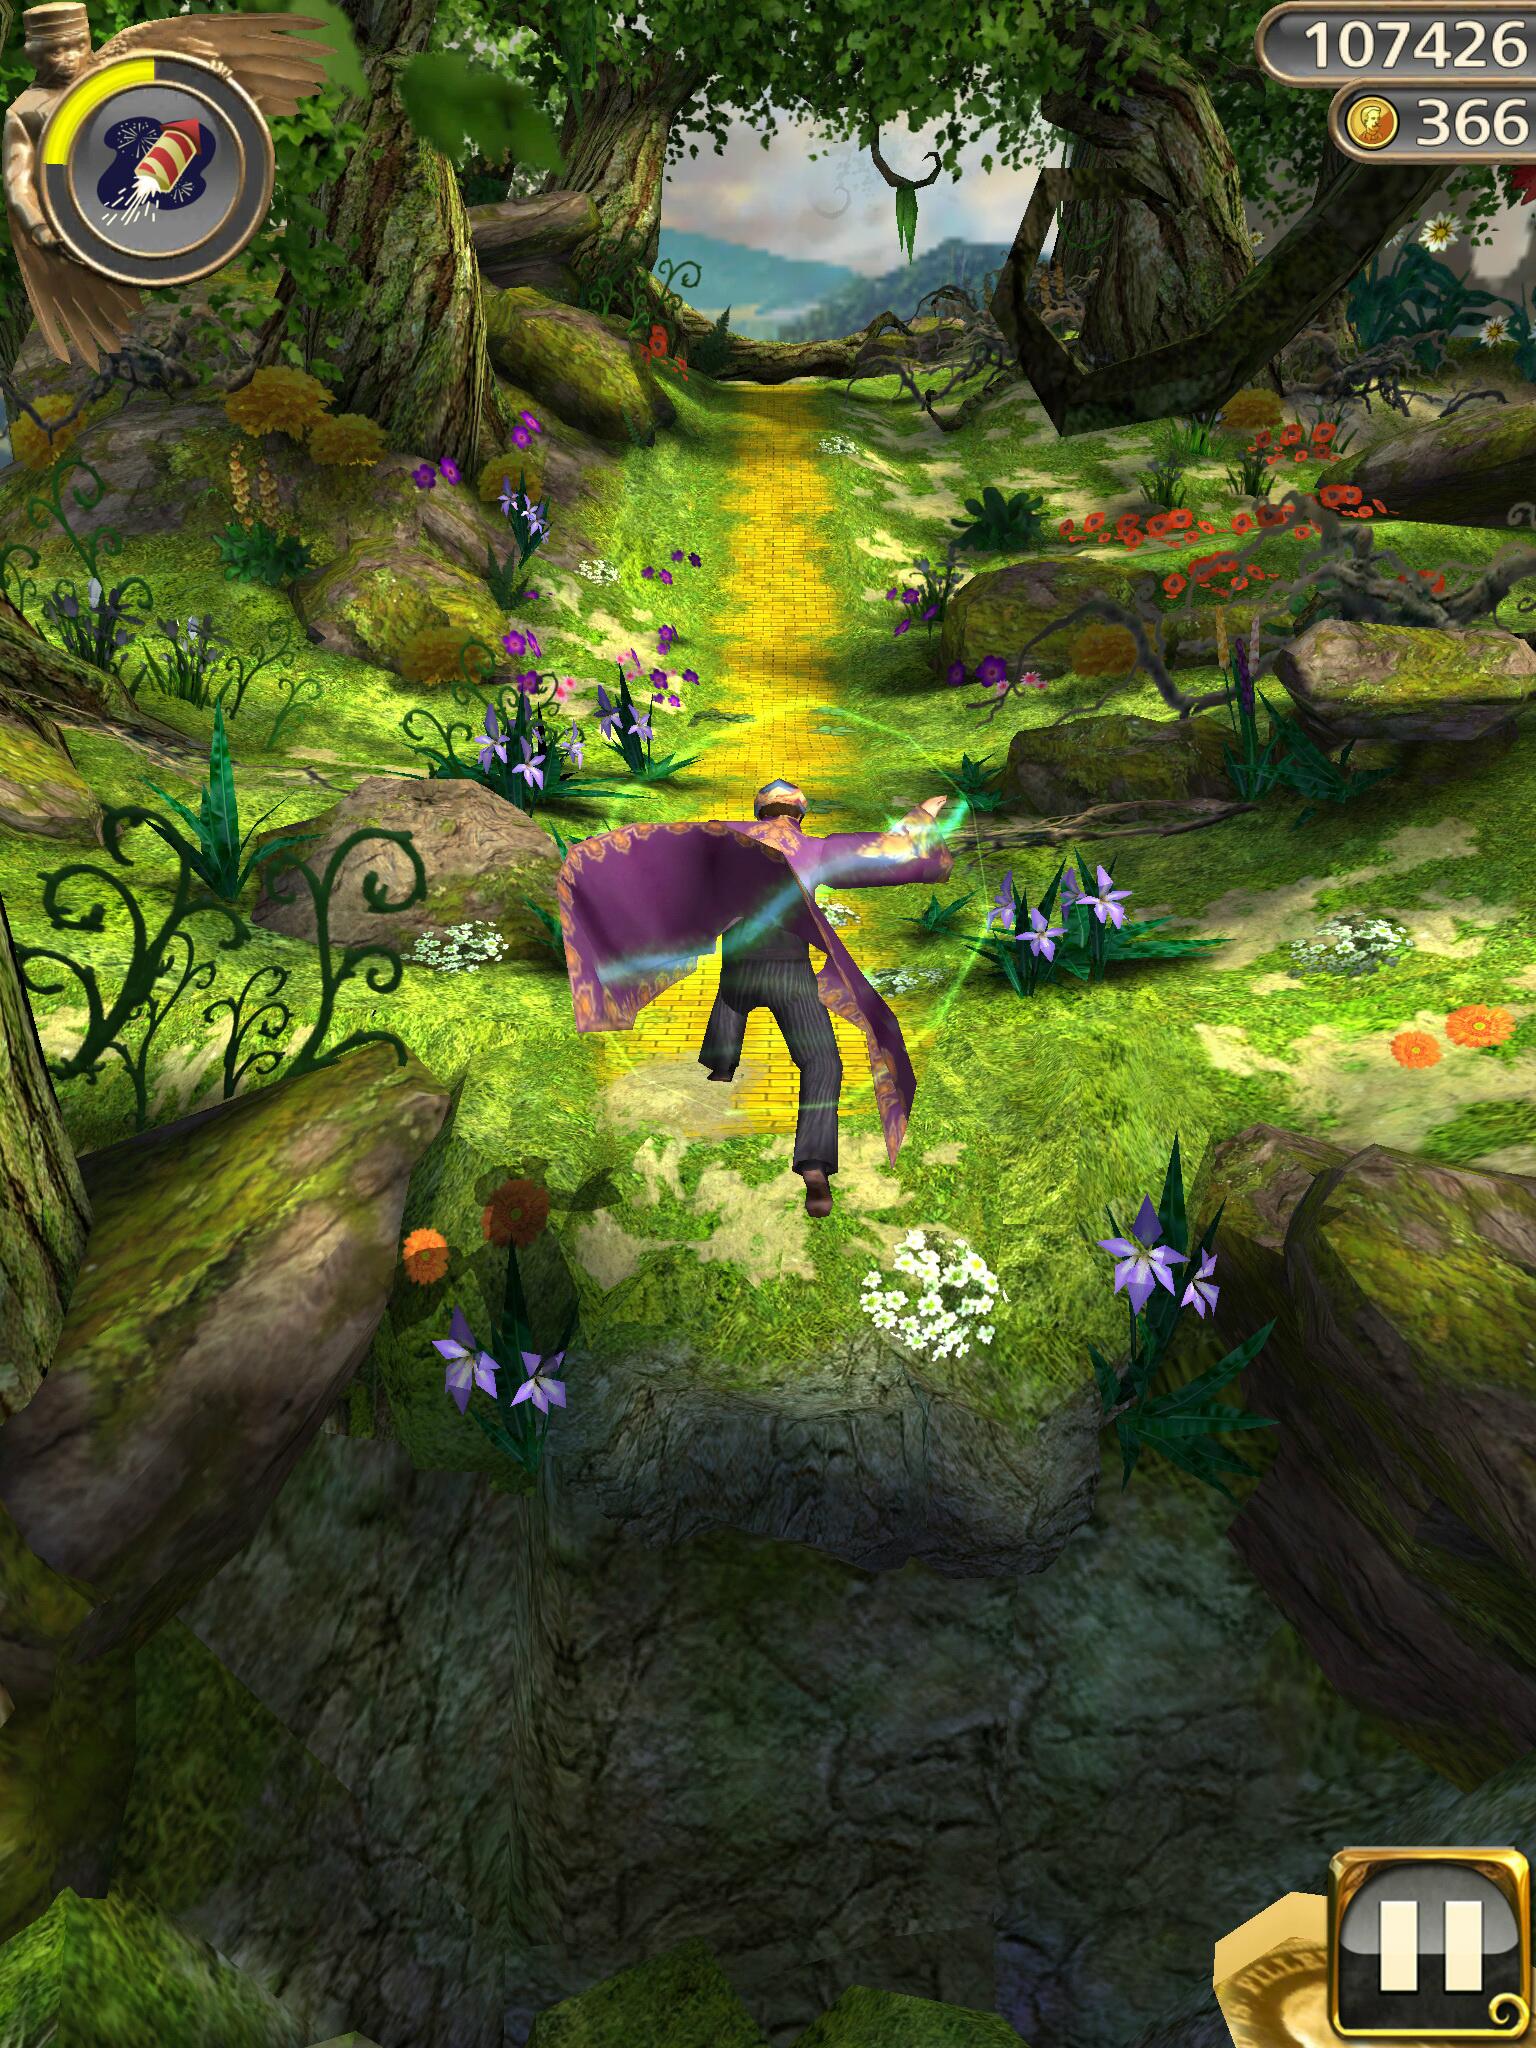 Temple Run on X: Check out cool new outfits for Oz AND run as